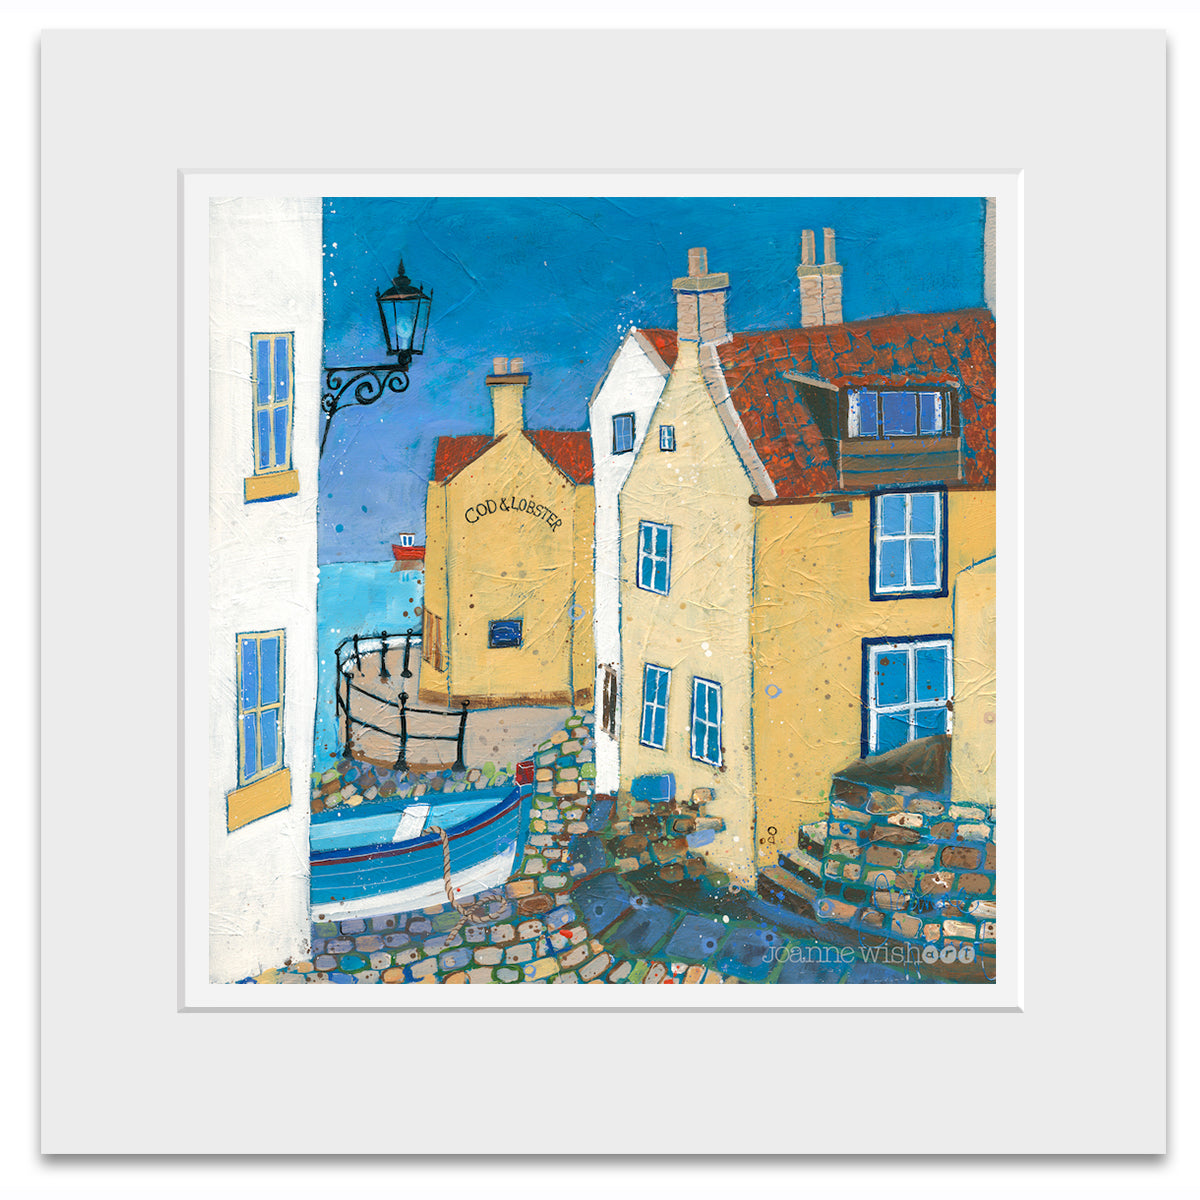 A mounted print of the Cod and Lobster pun in Staithes.